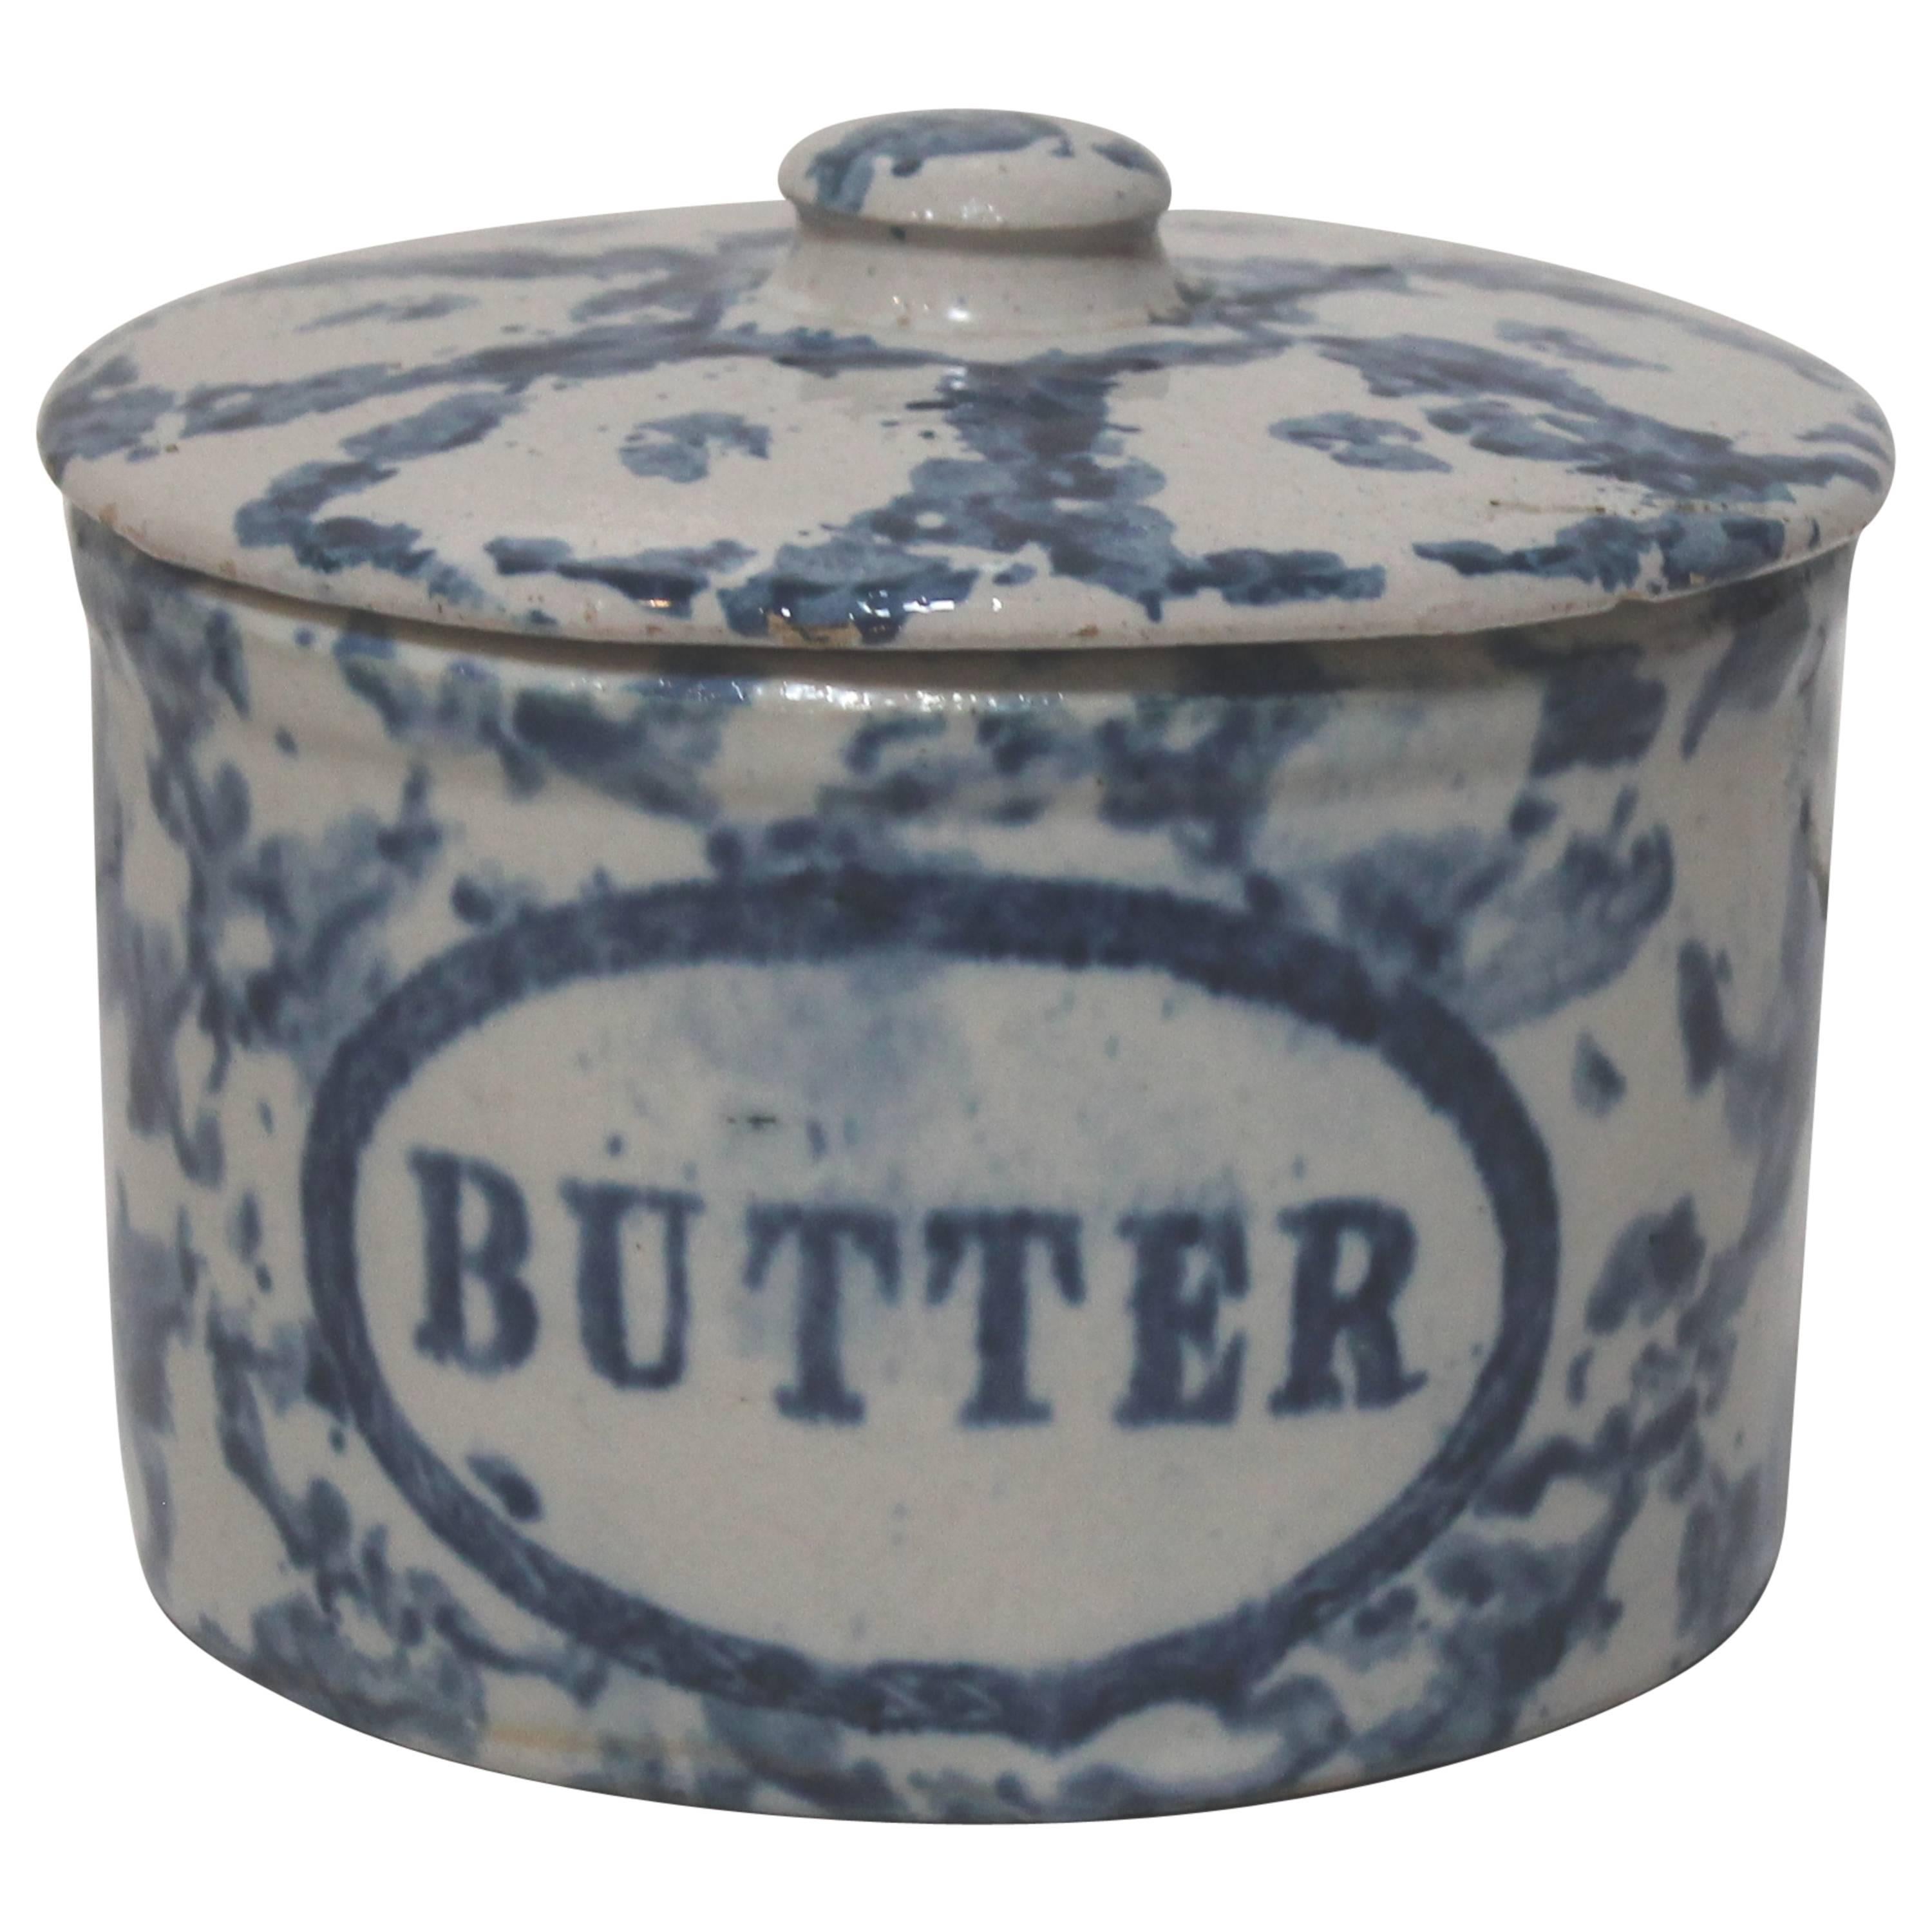 Details about   GRAPE VINE CERAMIC  BUTTER CROCK   MADE  IN  USA  AWESOME!!!! 